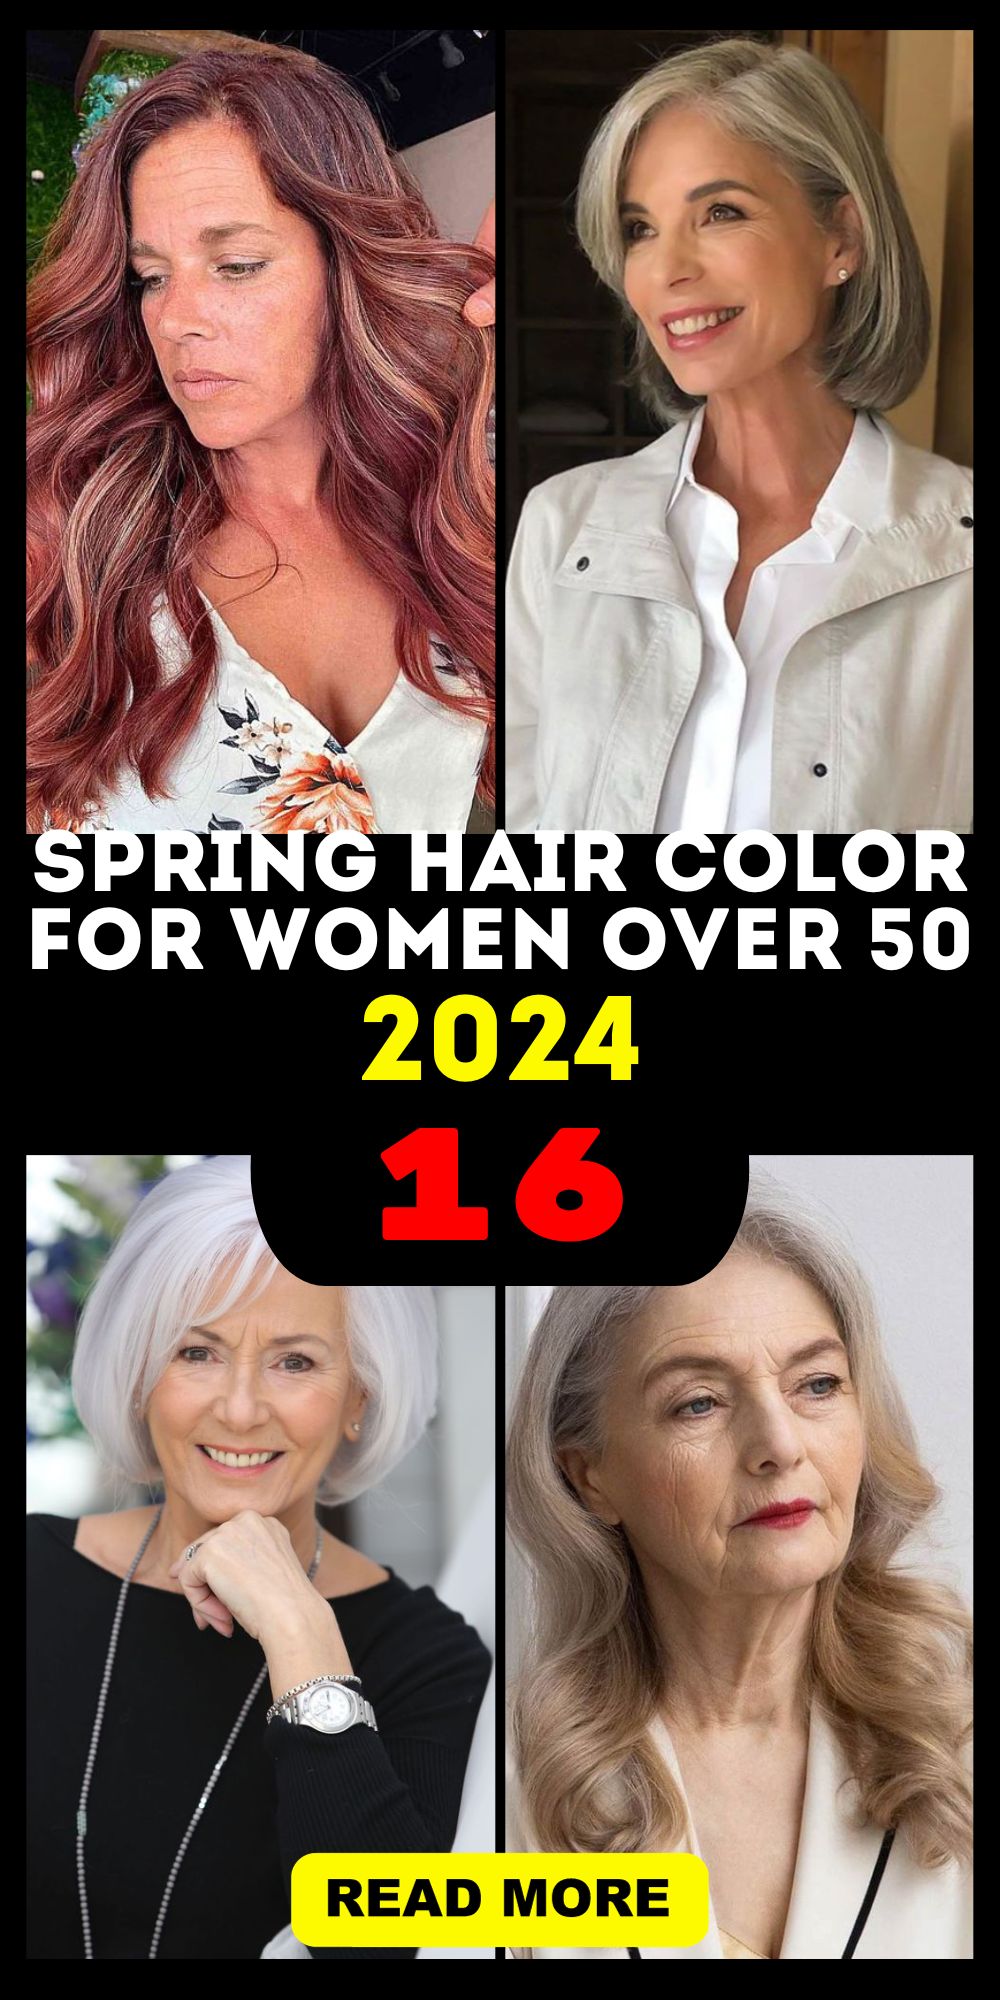 Discover Top Hair Color Ideas & Trends for Women Aged 50+ in Spring 2024